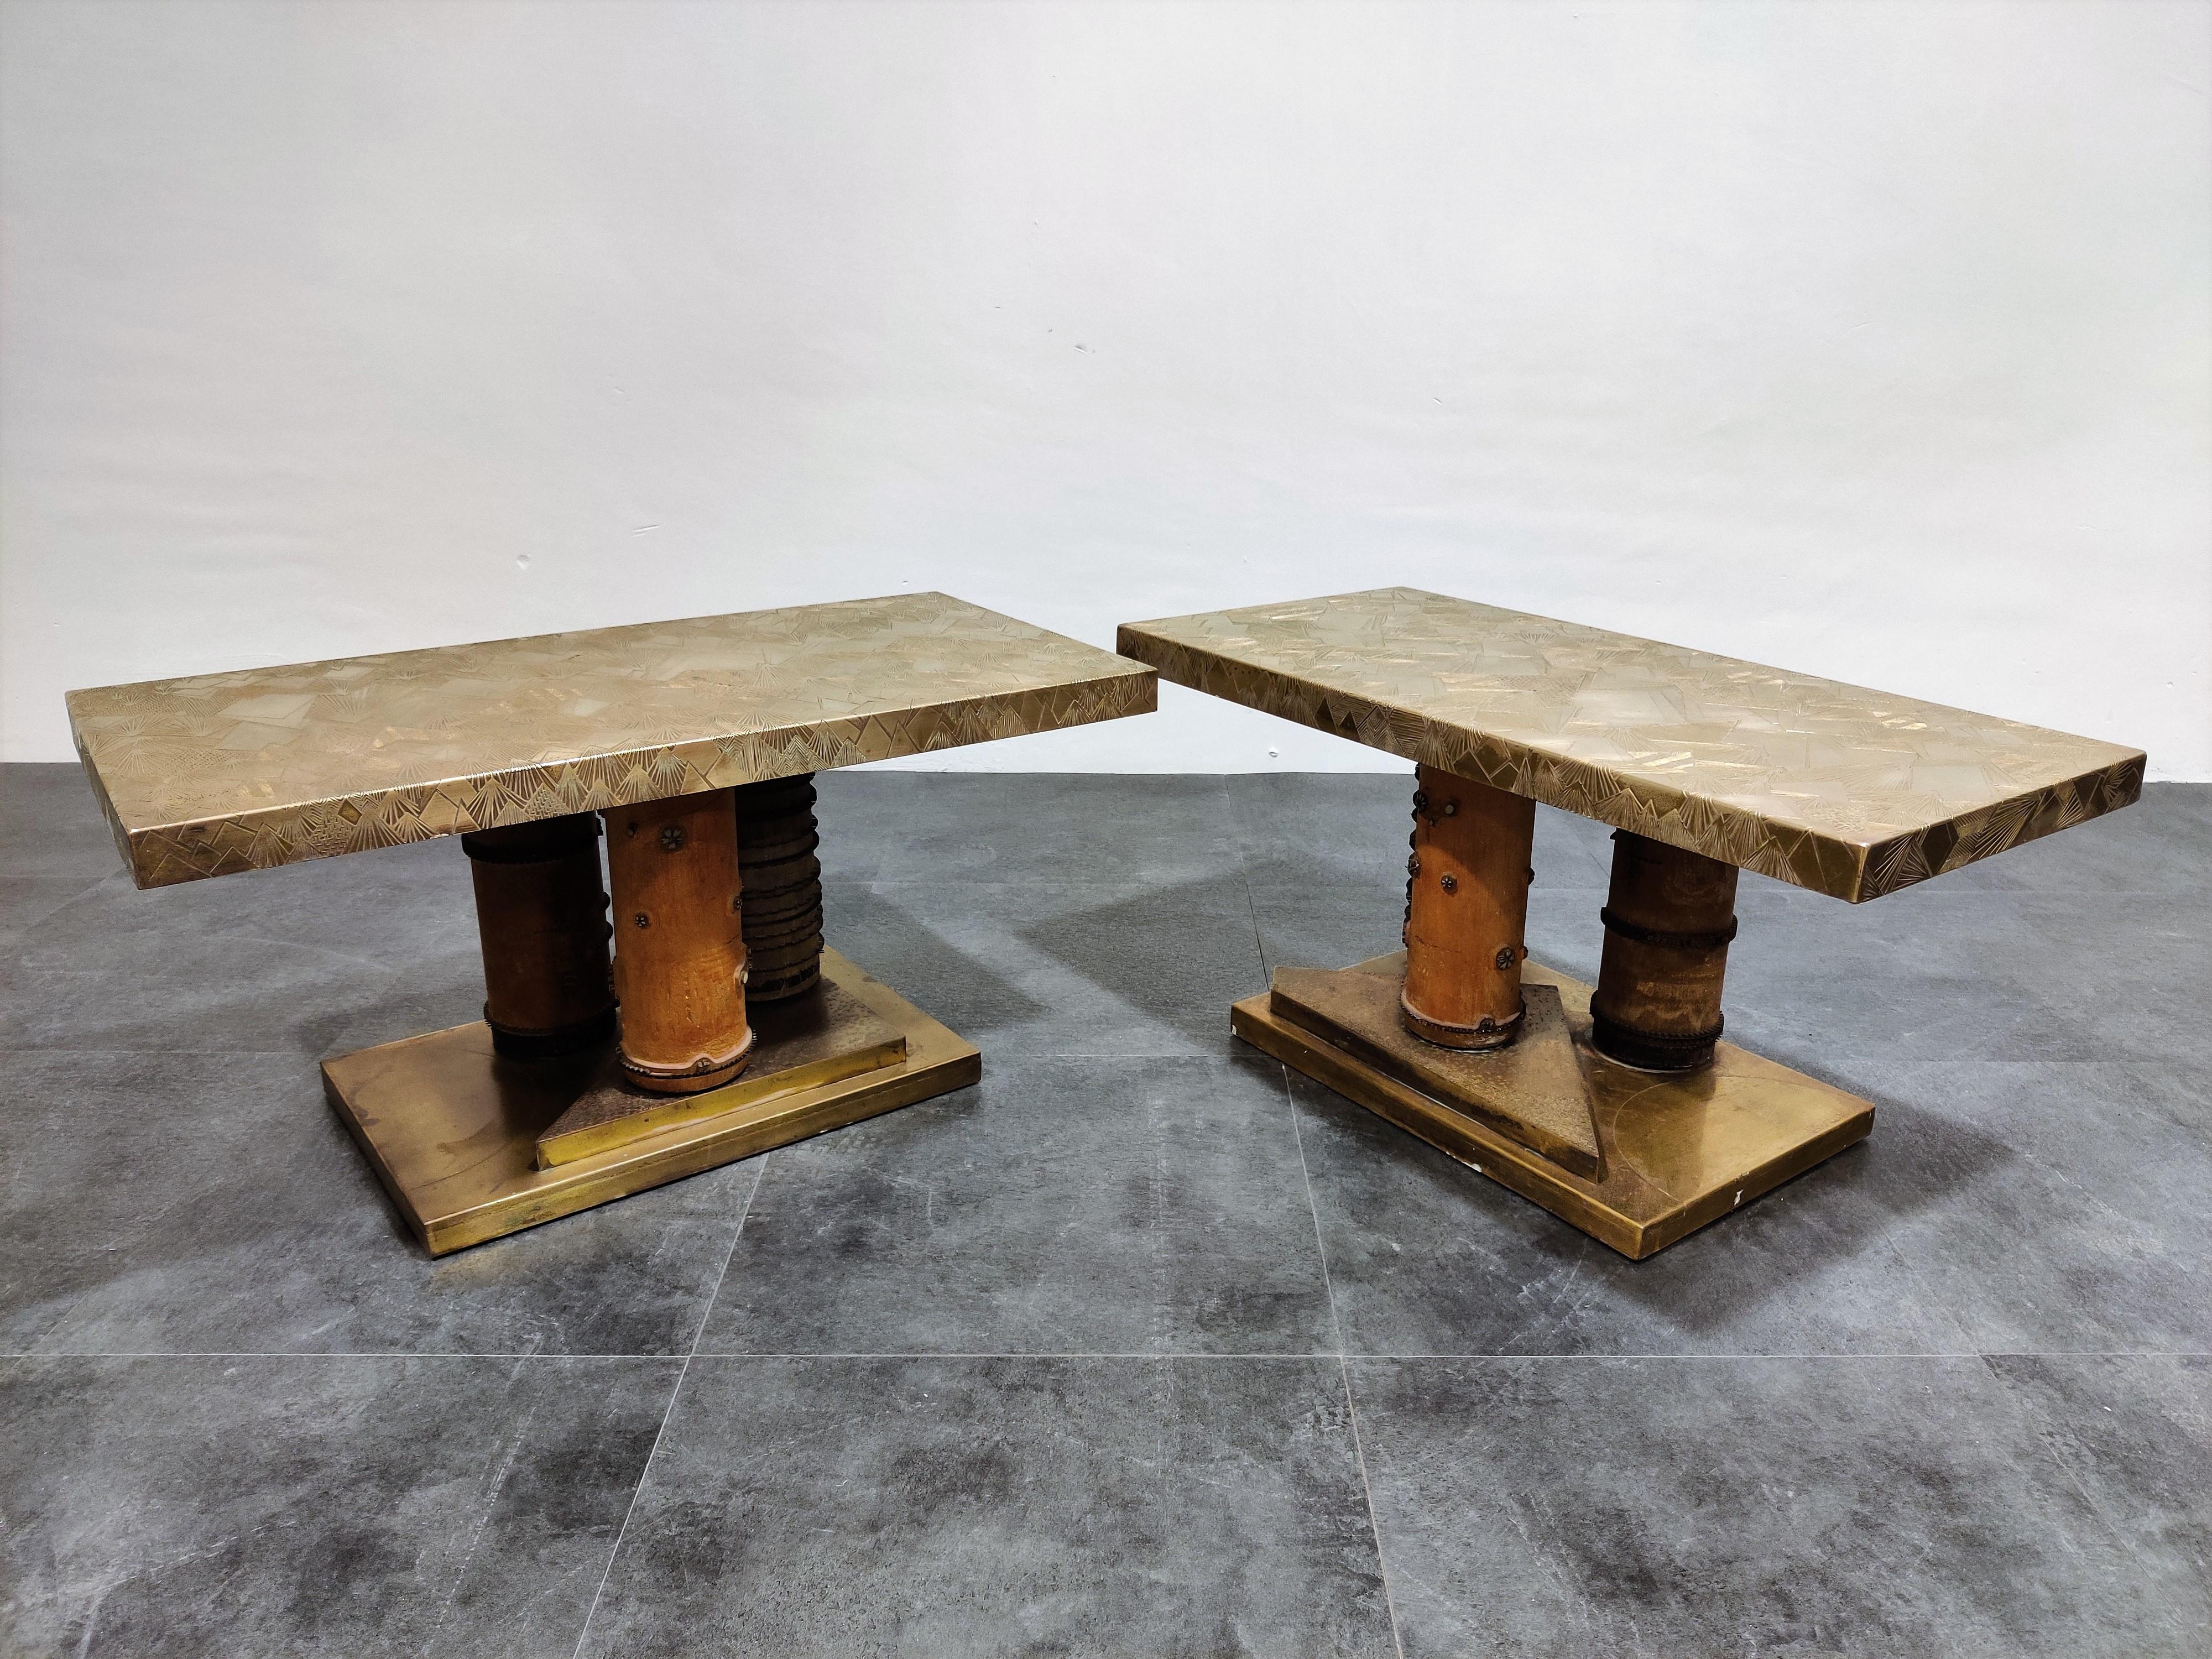 Unique Brutalist coffee tables or side tables.

These tables consist of an etched brass tabletop mounted on unique sculpted wooden legs.

Unknown designer but manufactured in France in the 1970s.

These gems are unique in their design and are